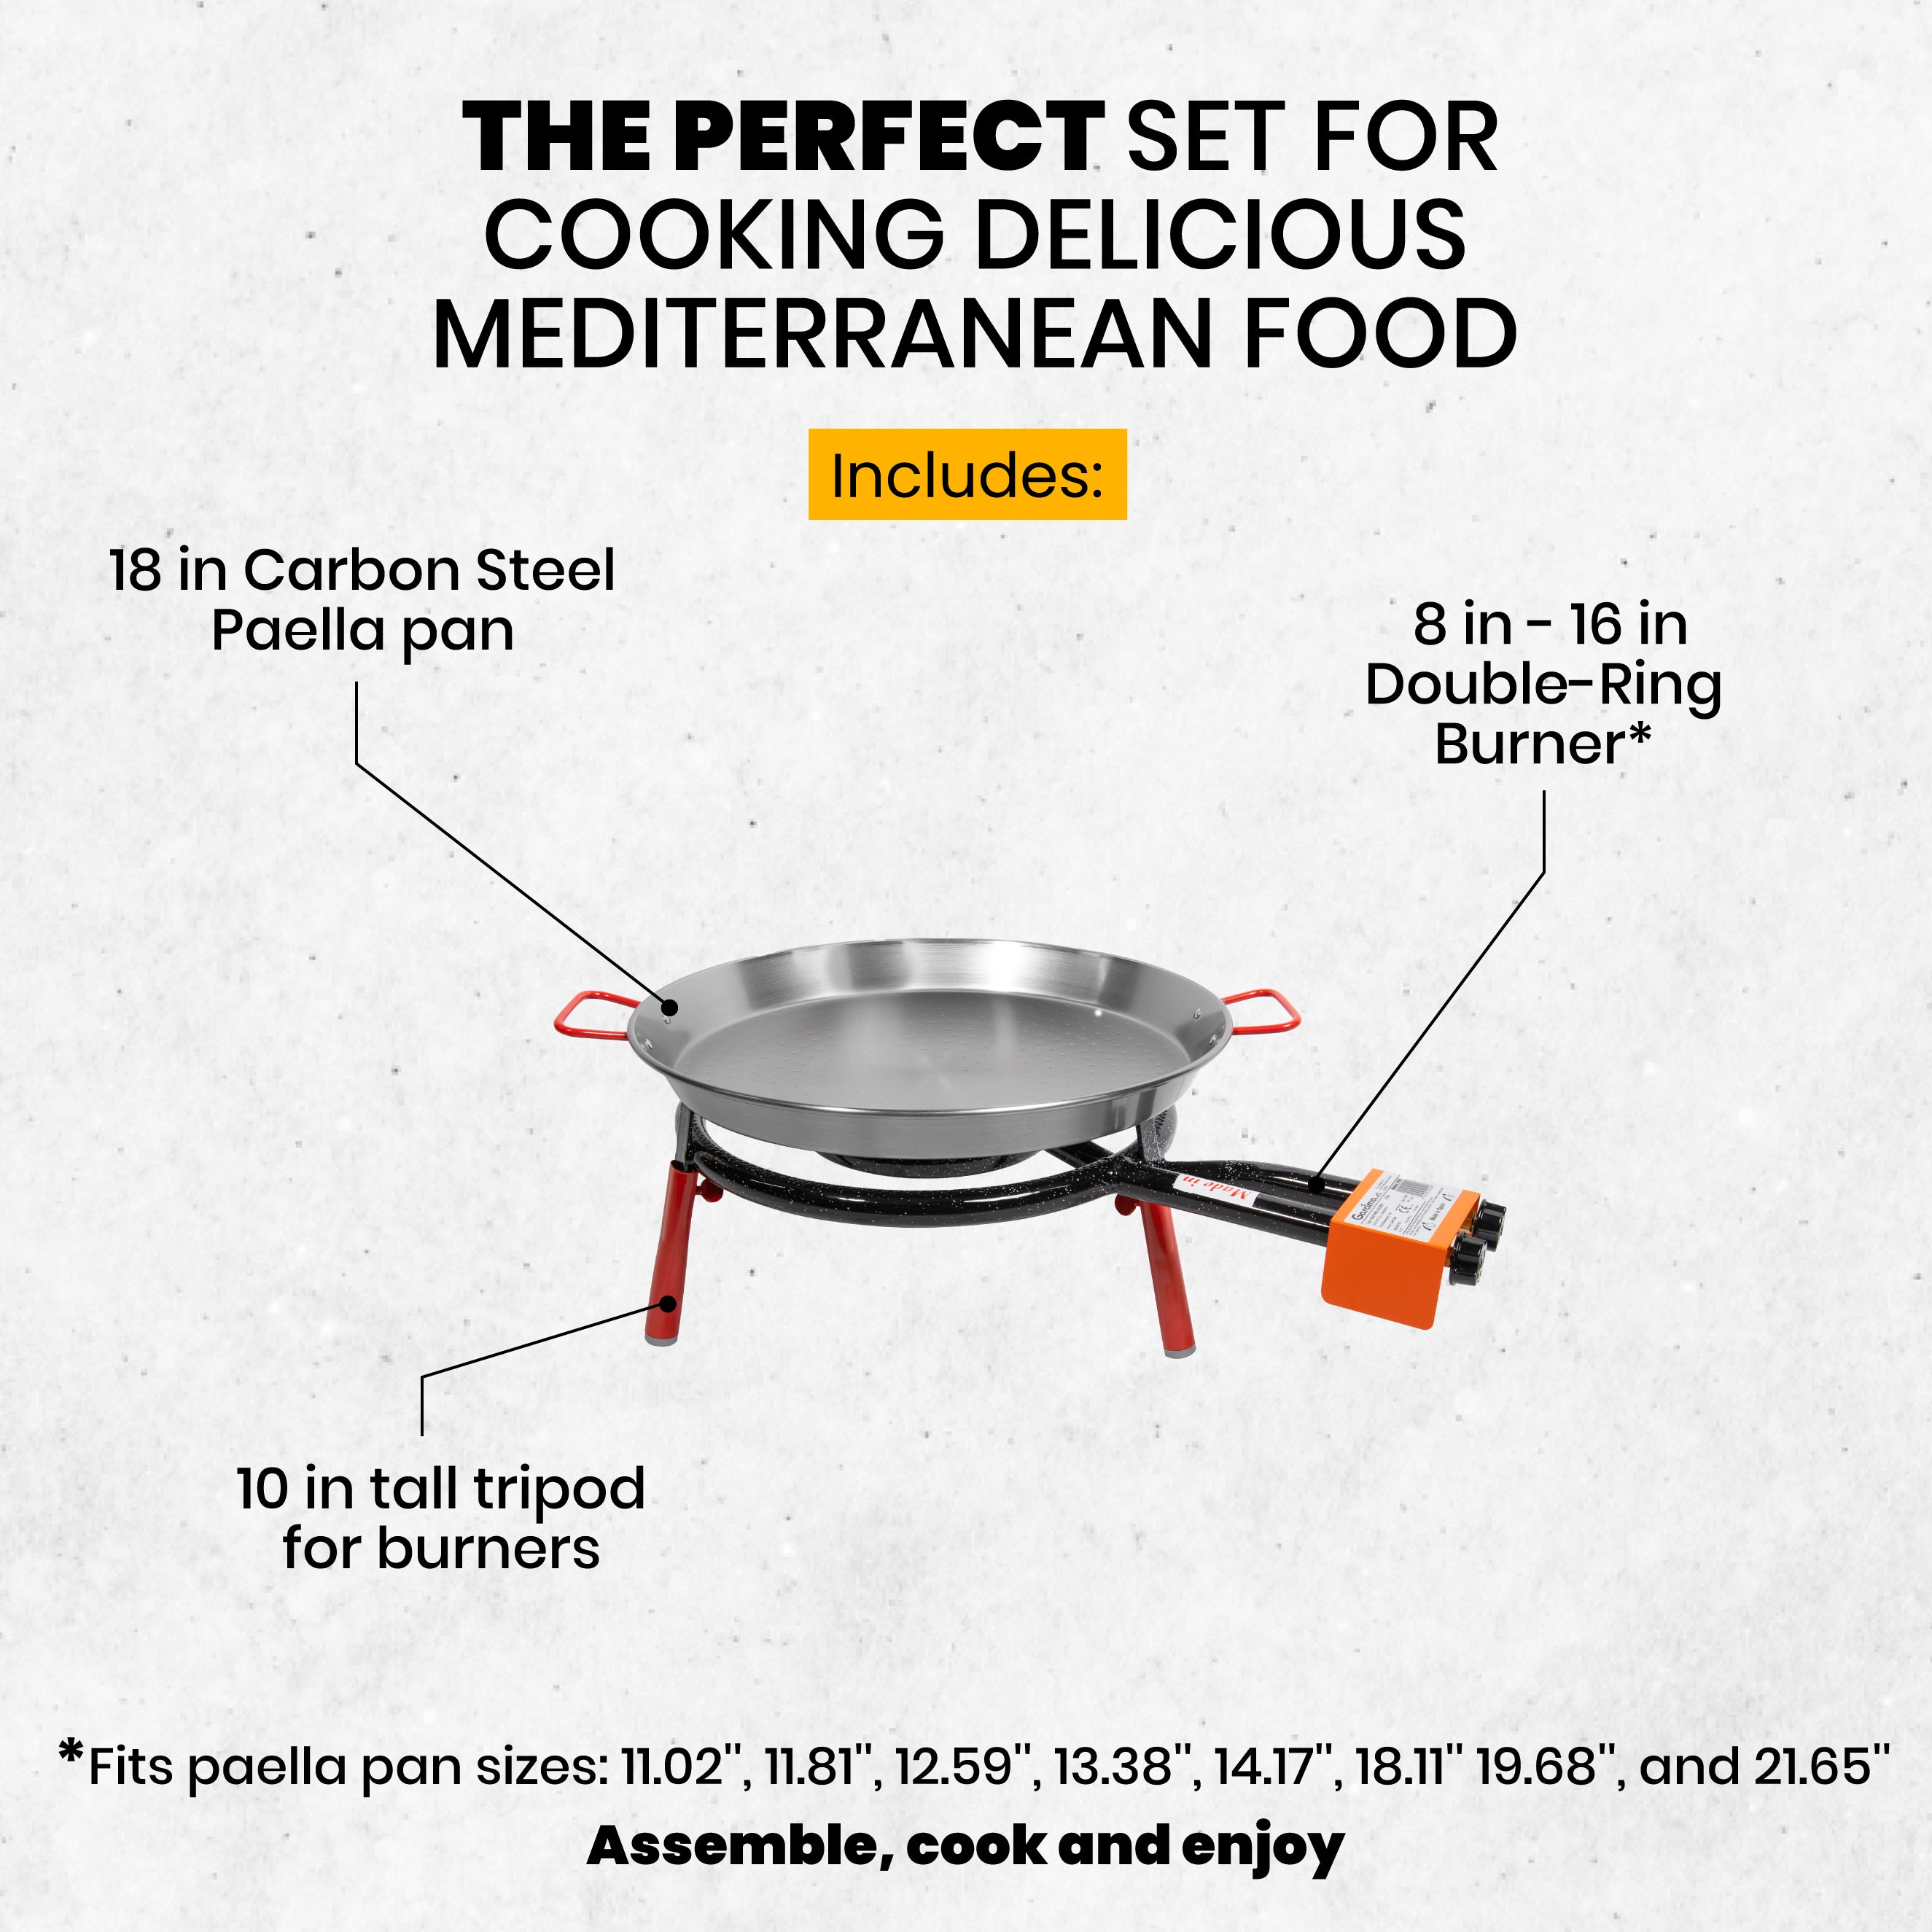 Paella Kit with 18-inch Carbon Steel Pan | 8-16 in Double Ring Paella Burner and Stand Set (10 in) | Perfect for Gastronomic Events, Caterings, Camping | 12 Servings